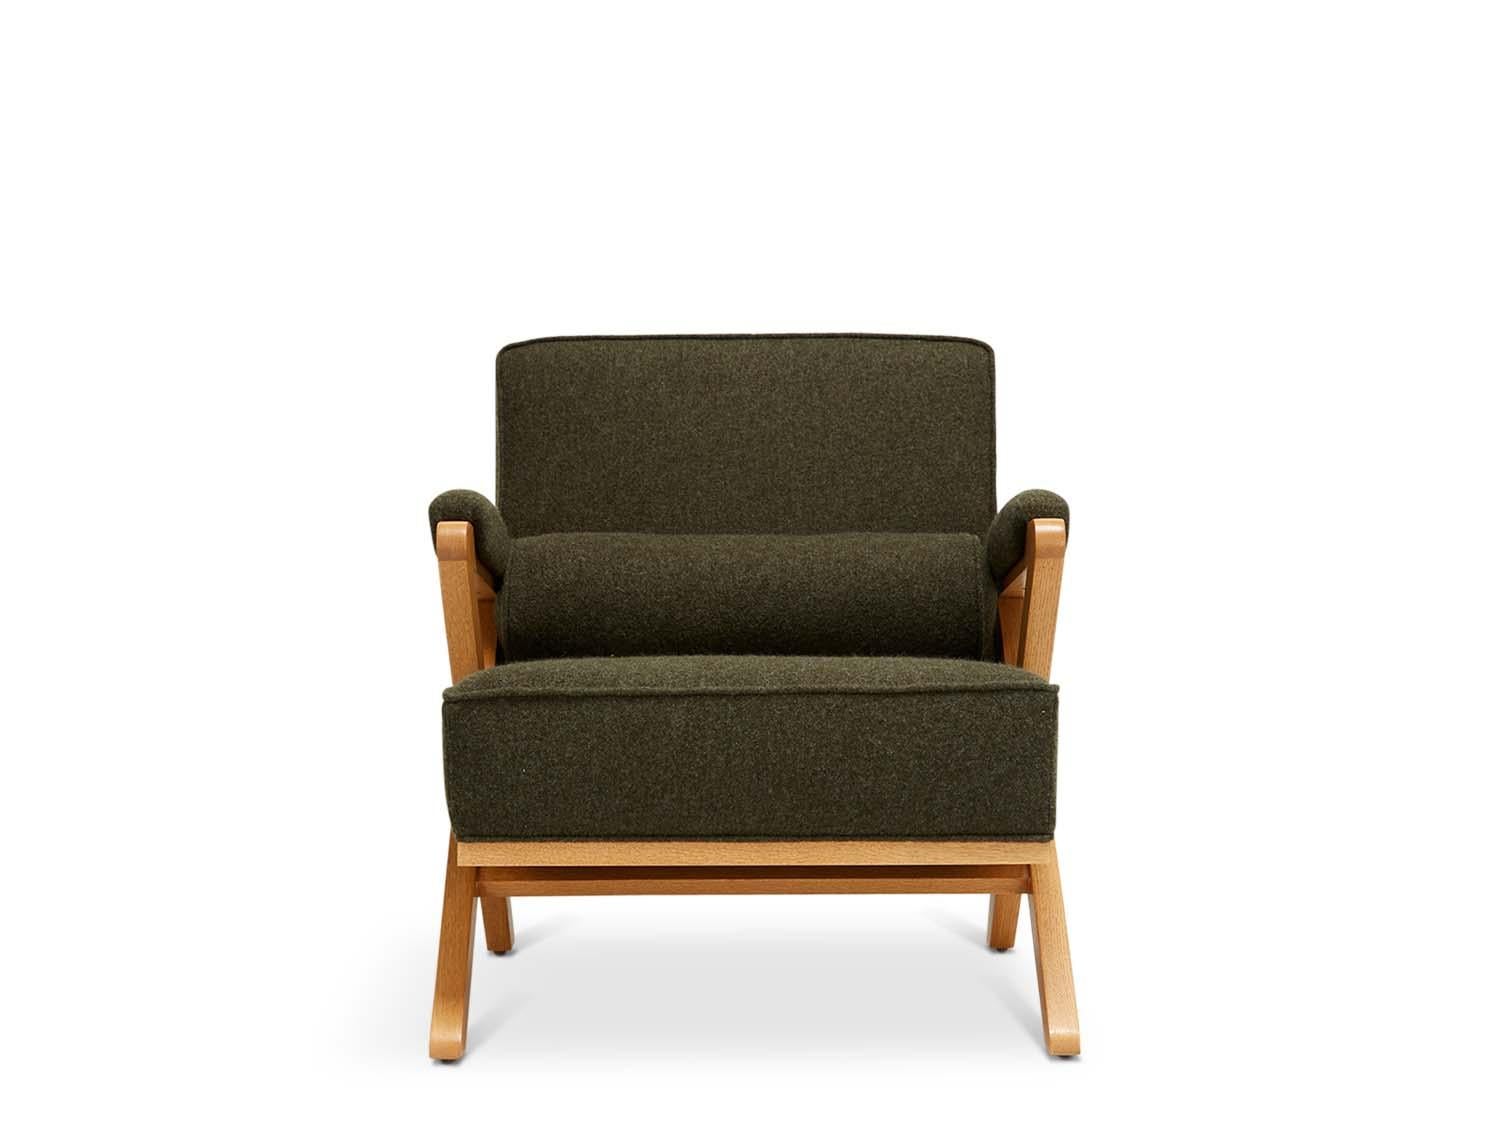 The Dillon chair has a solid American walnut or white oak x-based frame that features boxed cushions with piping and buttons on the back cushion. 

 The Lawson-Fenning Collection is designed and handmade in Los Angeles, California. Reach out to